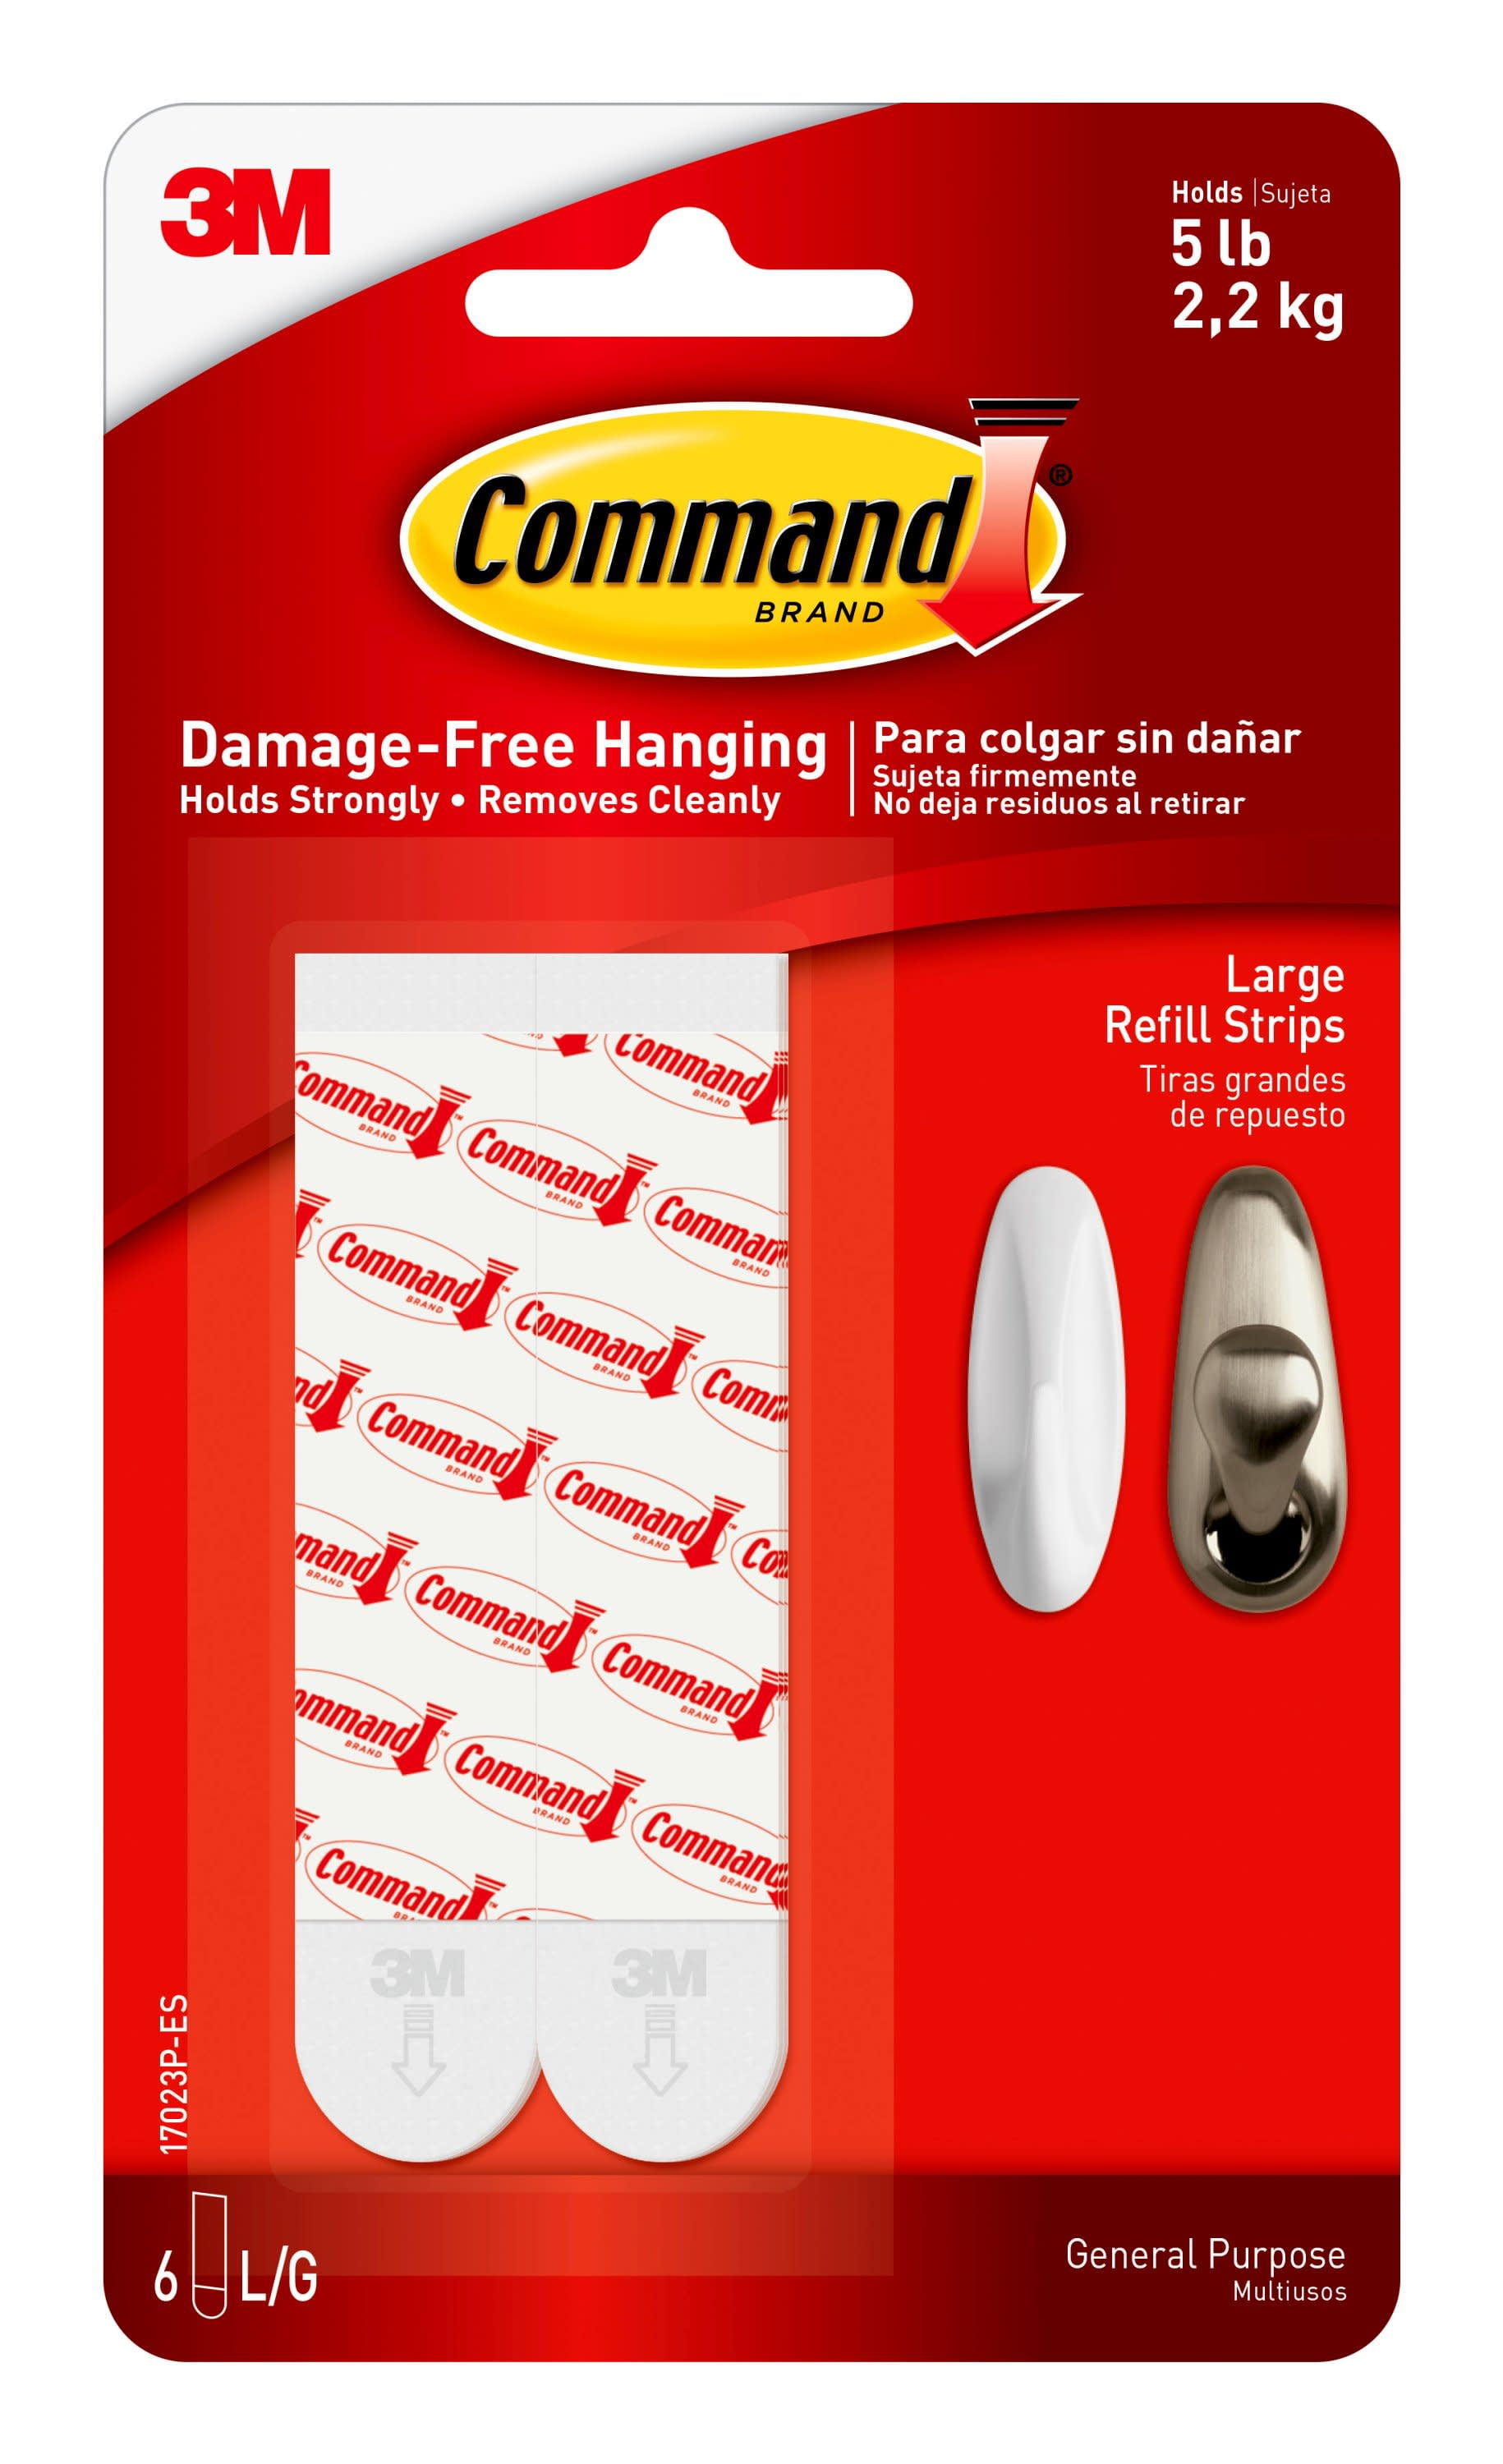 3M Command Large Picture Hanging Strips Reviews 2024